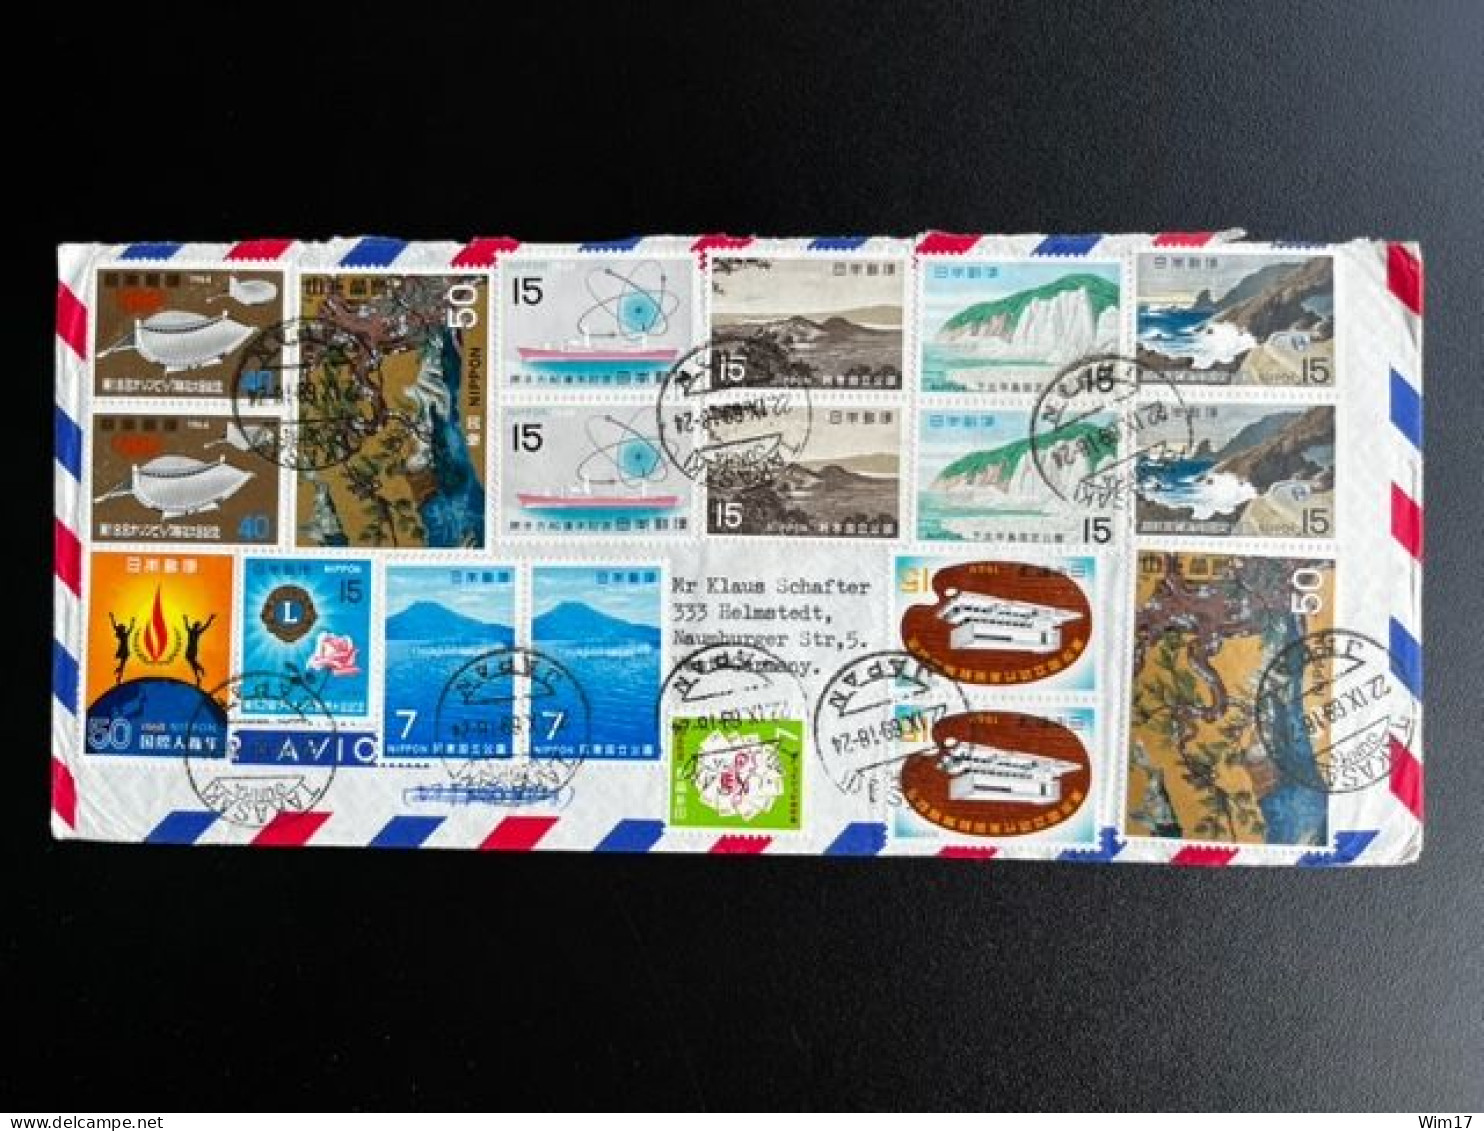 JAPAN NIPPON 1969 AIR MAIL LETTER TAKASAKI TO HELMSTEDT GERMANY 22-09-1969 - Briefe U. Dokumente